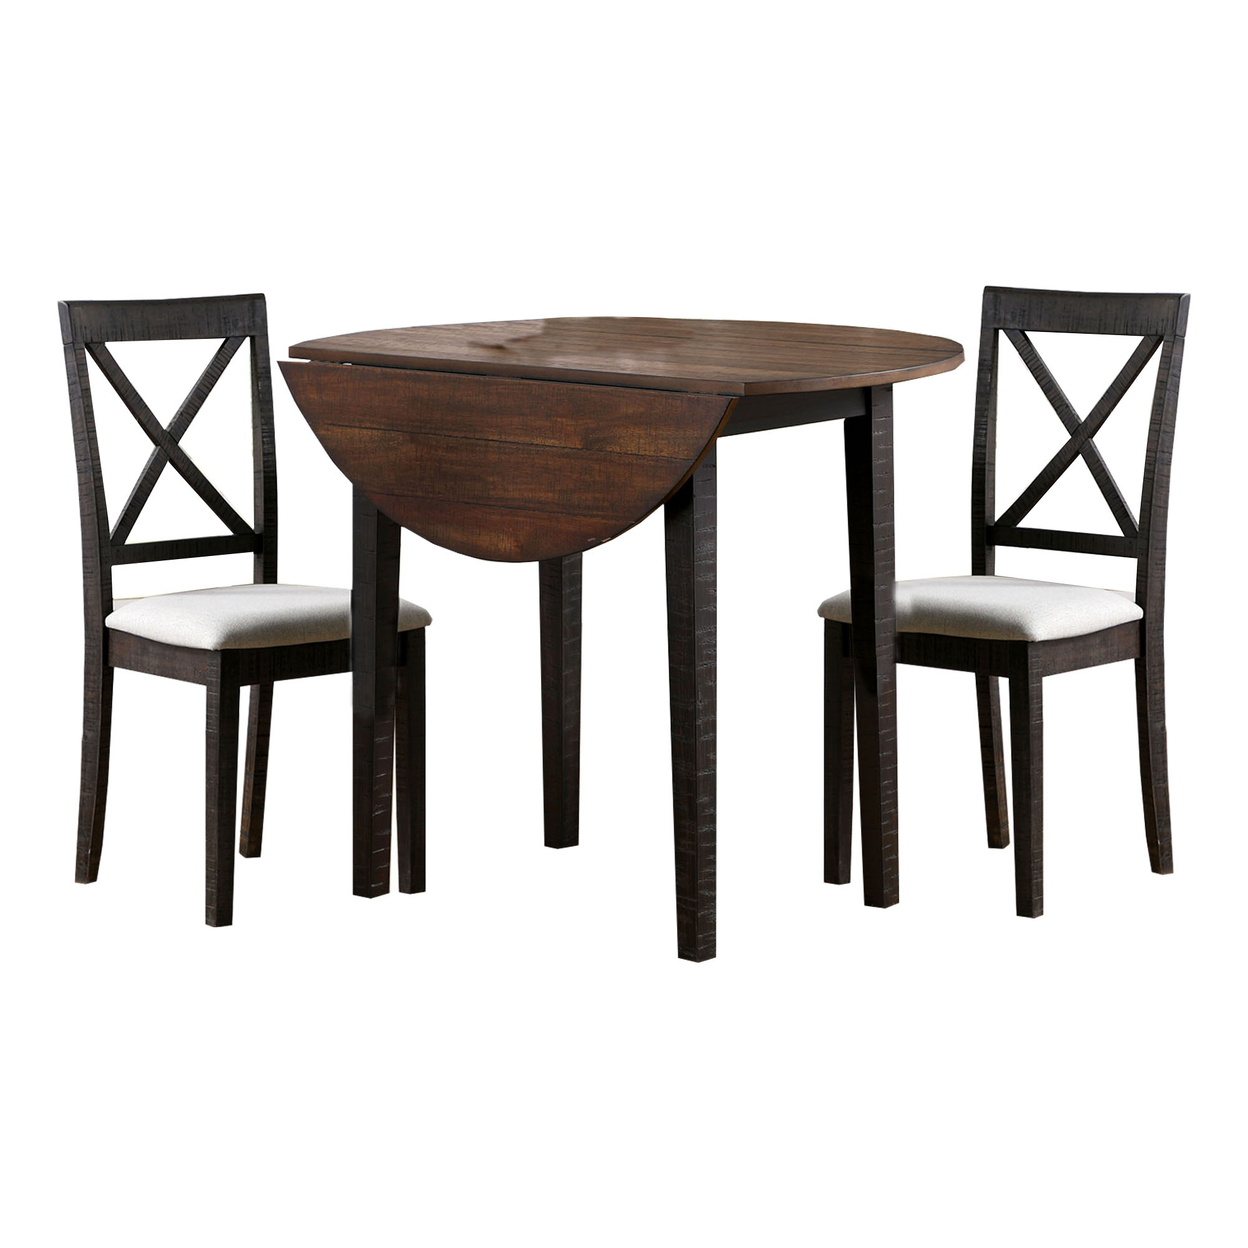 Drop Down Leaf 3 Piece Dining Table Set With X Shaped Back, Gray- Saltoro Sherpi